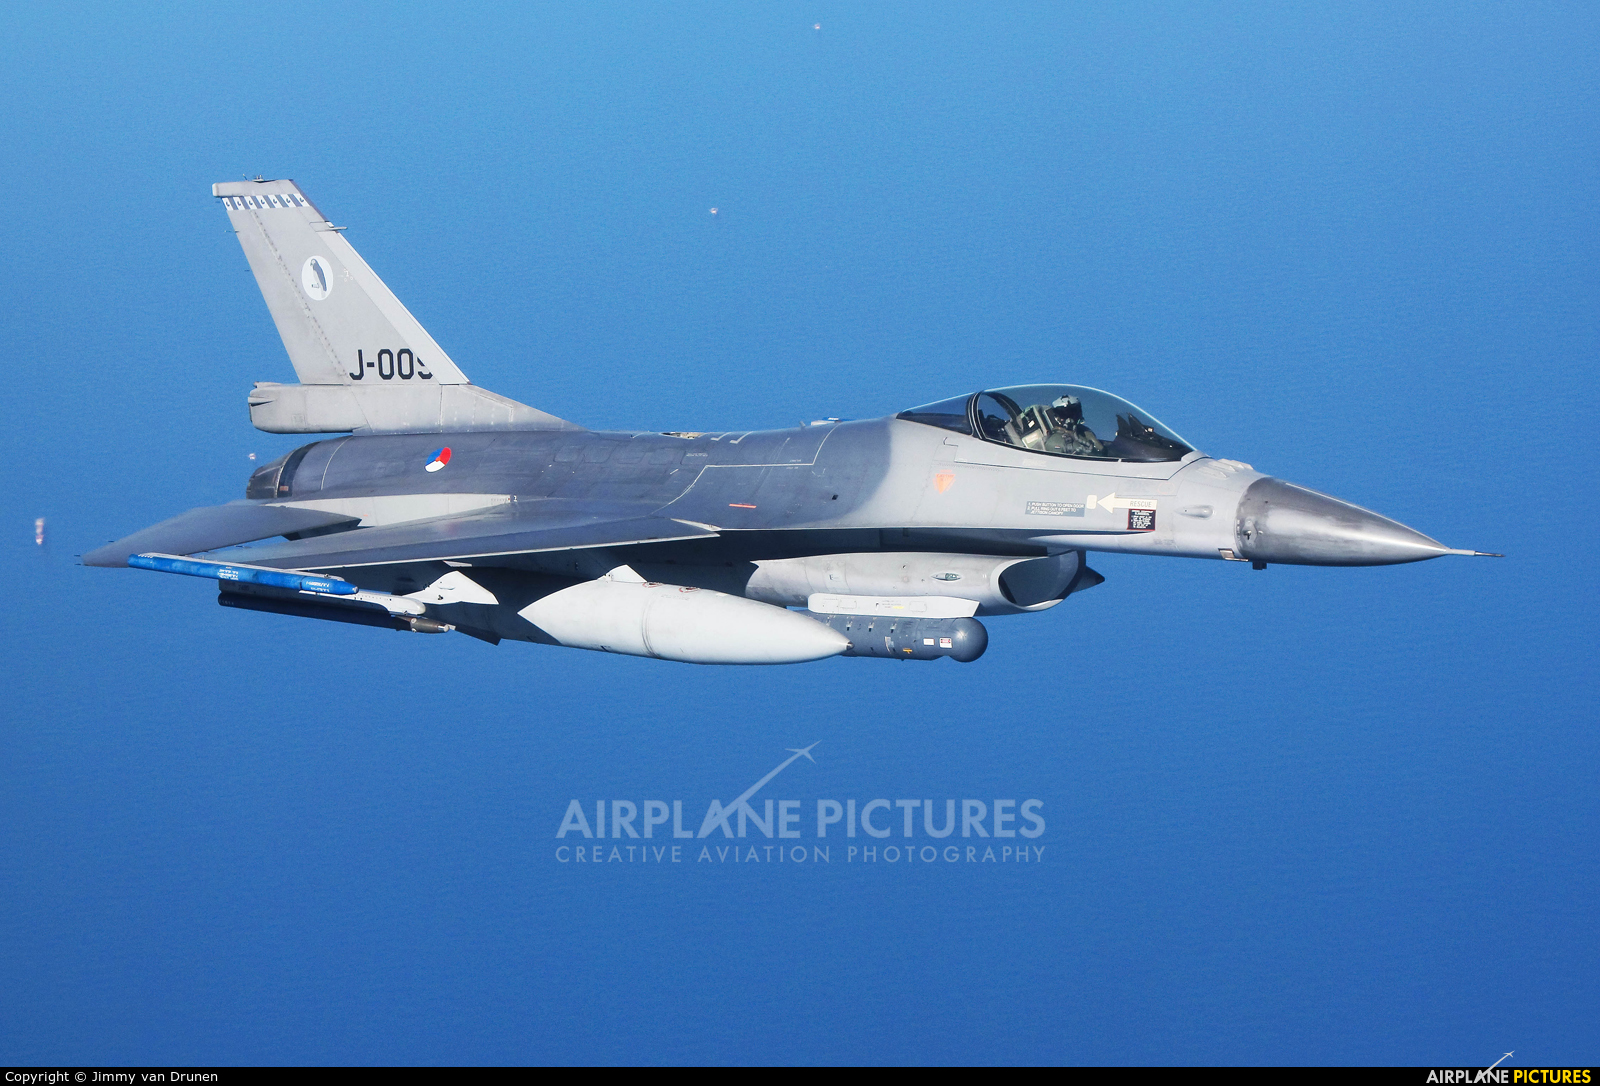 Netherlands - Air Force J-009 aircraft at In Flight - Netherlands